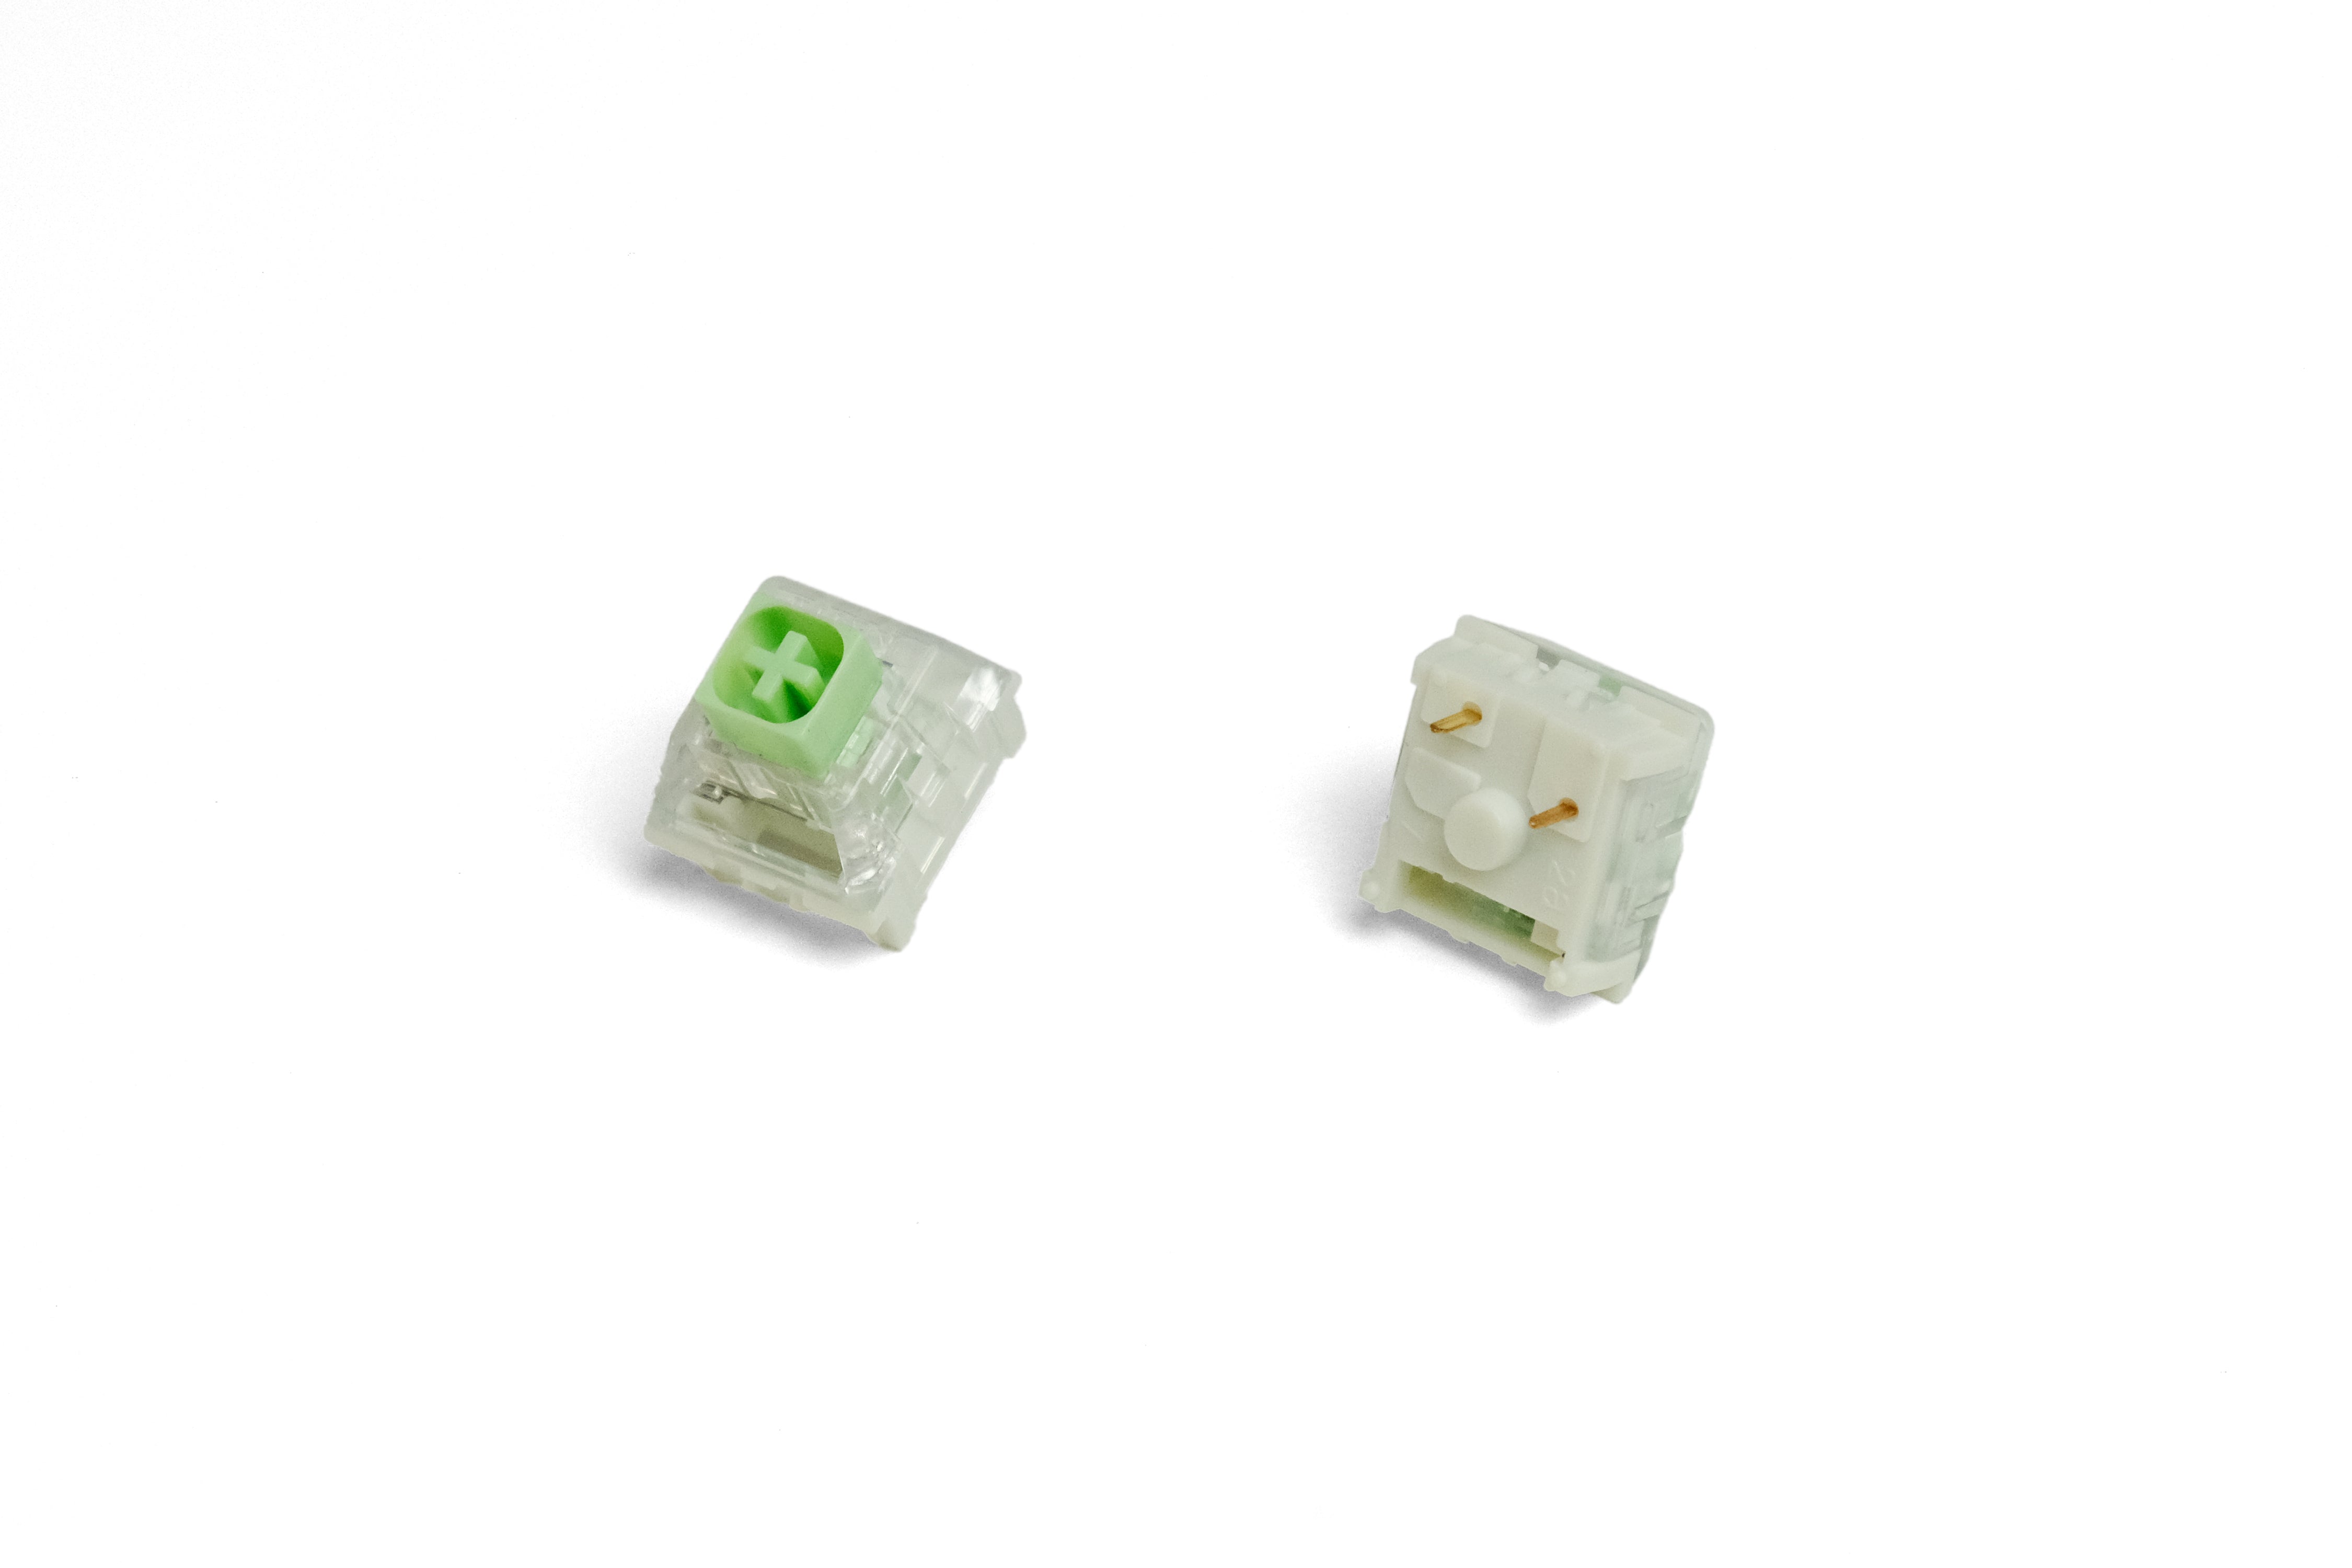 Kailh Box Jade Clicky Switches at KeebsForAll